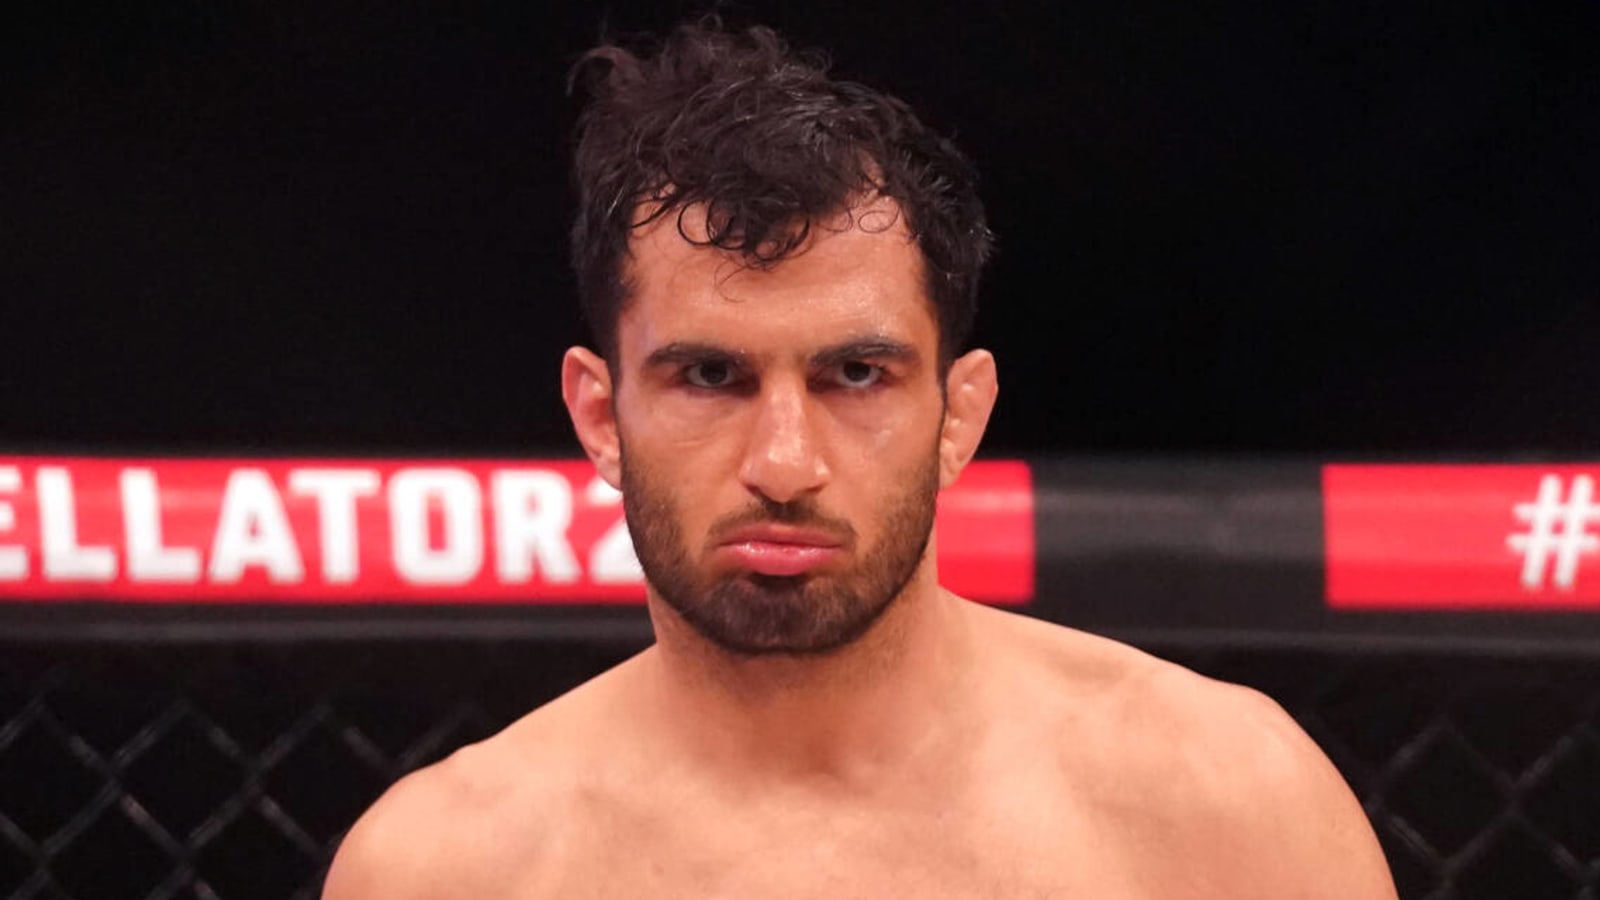 Gegard Mousasi-Johnny Eblen middleweight title bout targeted for Bellator event in June